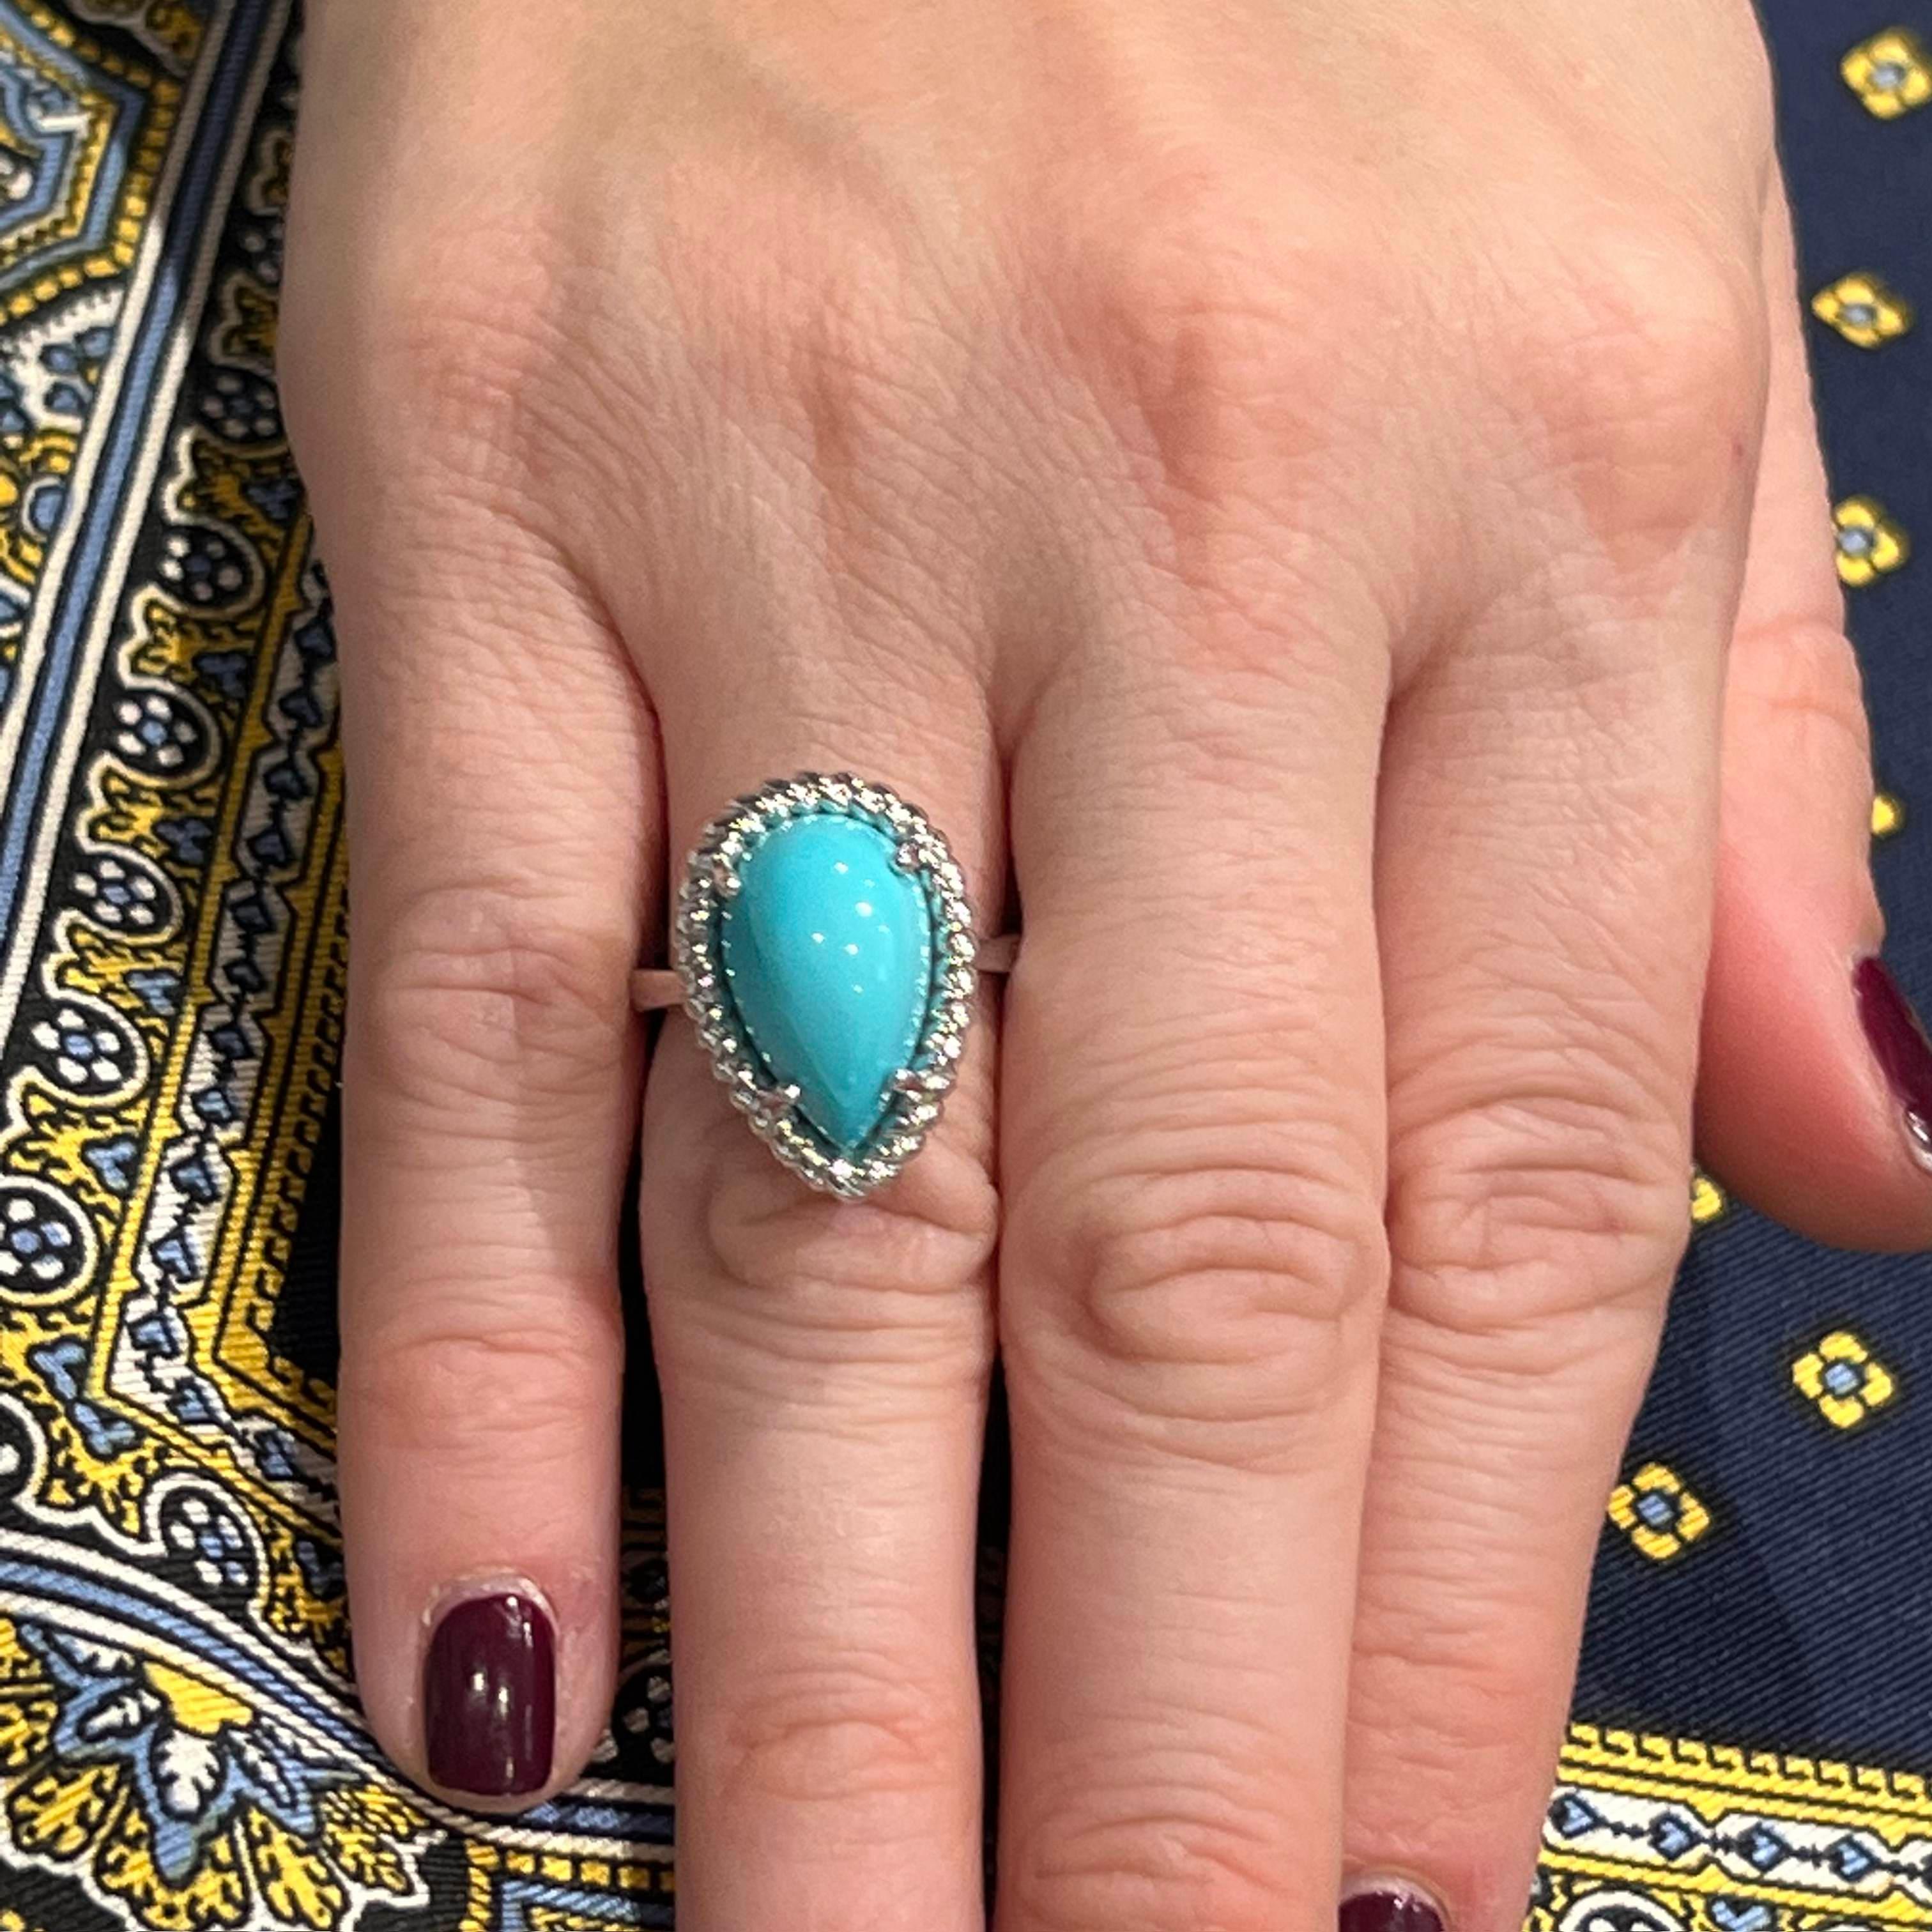 Natural Persian Turquoise Ring Size 6 14k White Gold 6.21 TCW Certified $4,250 221276

Nothing says, “I Love you” more than Diamonds and Pearls!

This Turquoise ring has been Certified, Inspected, and Appraised by Gemological Appraisal